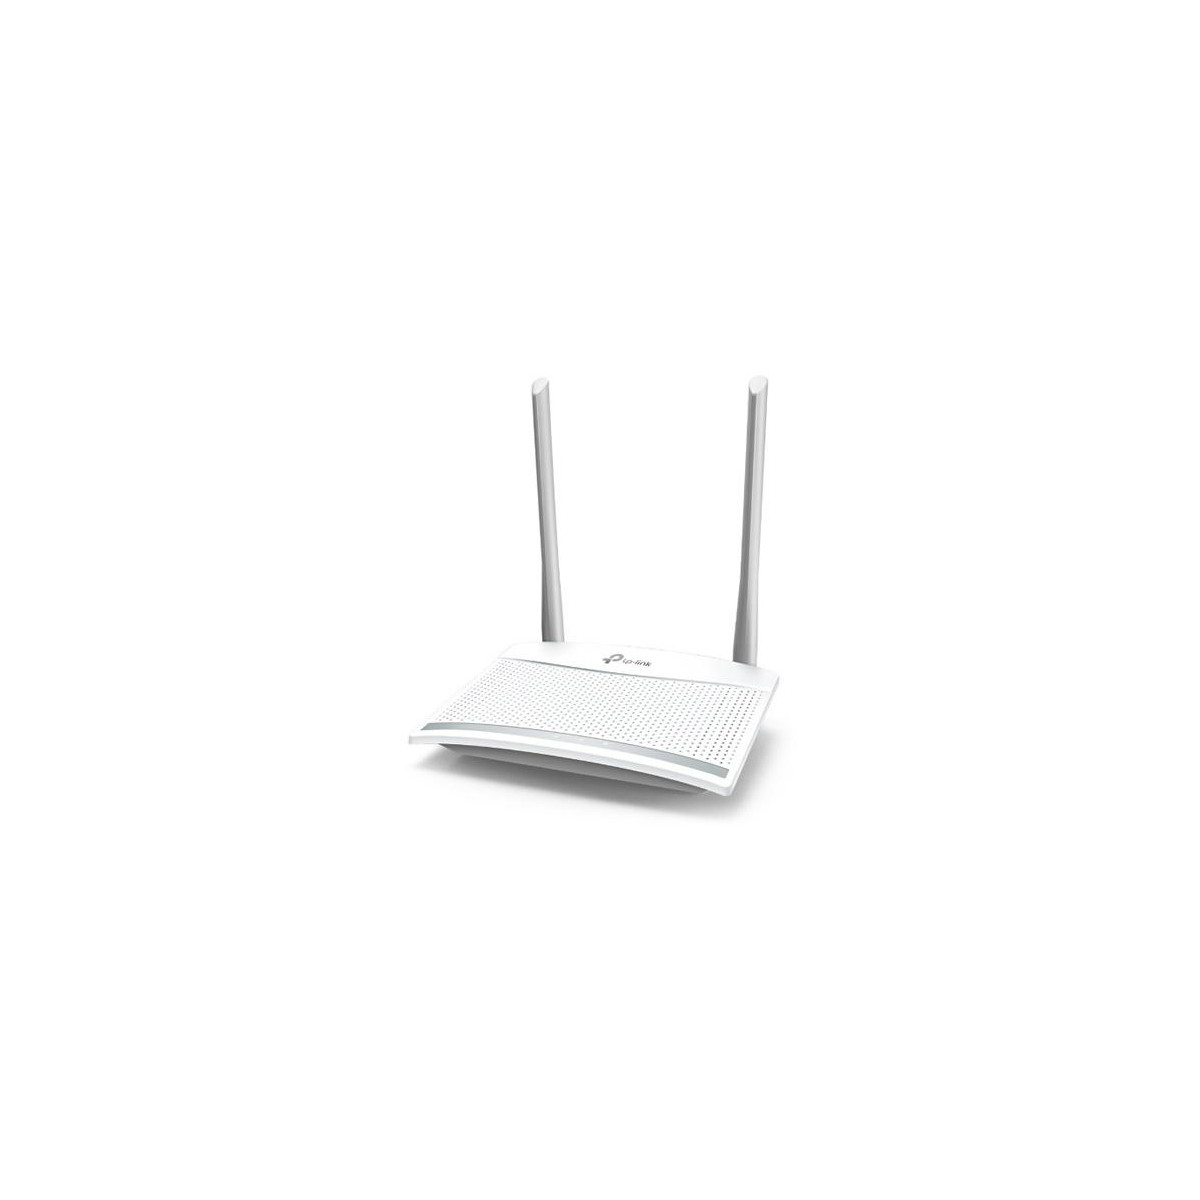 More about Router TP-LINK TL-WR820N